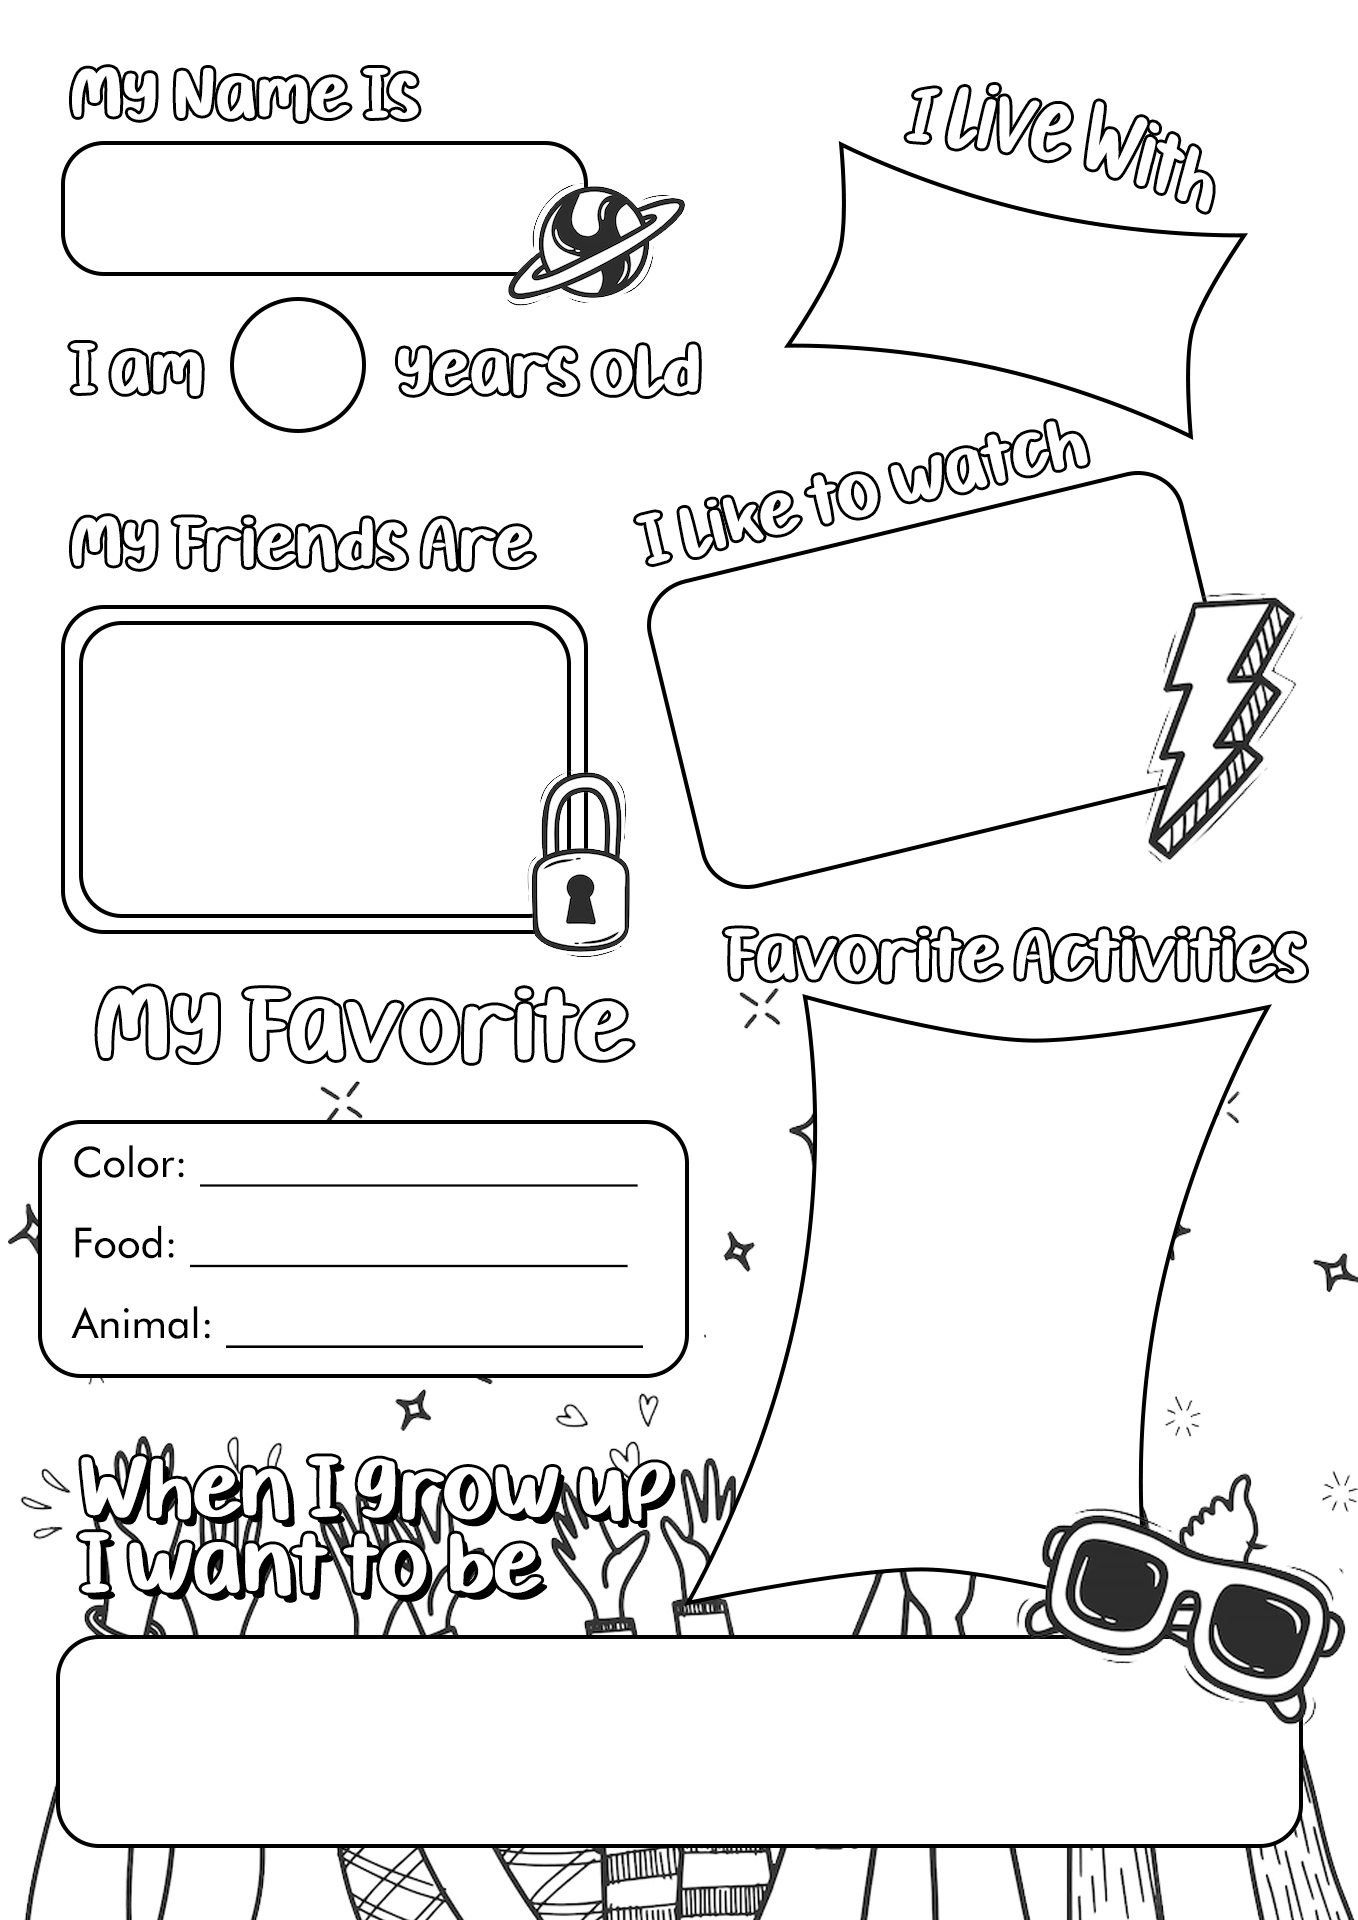 All About Me School Worksheet Image